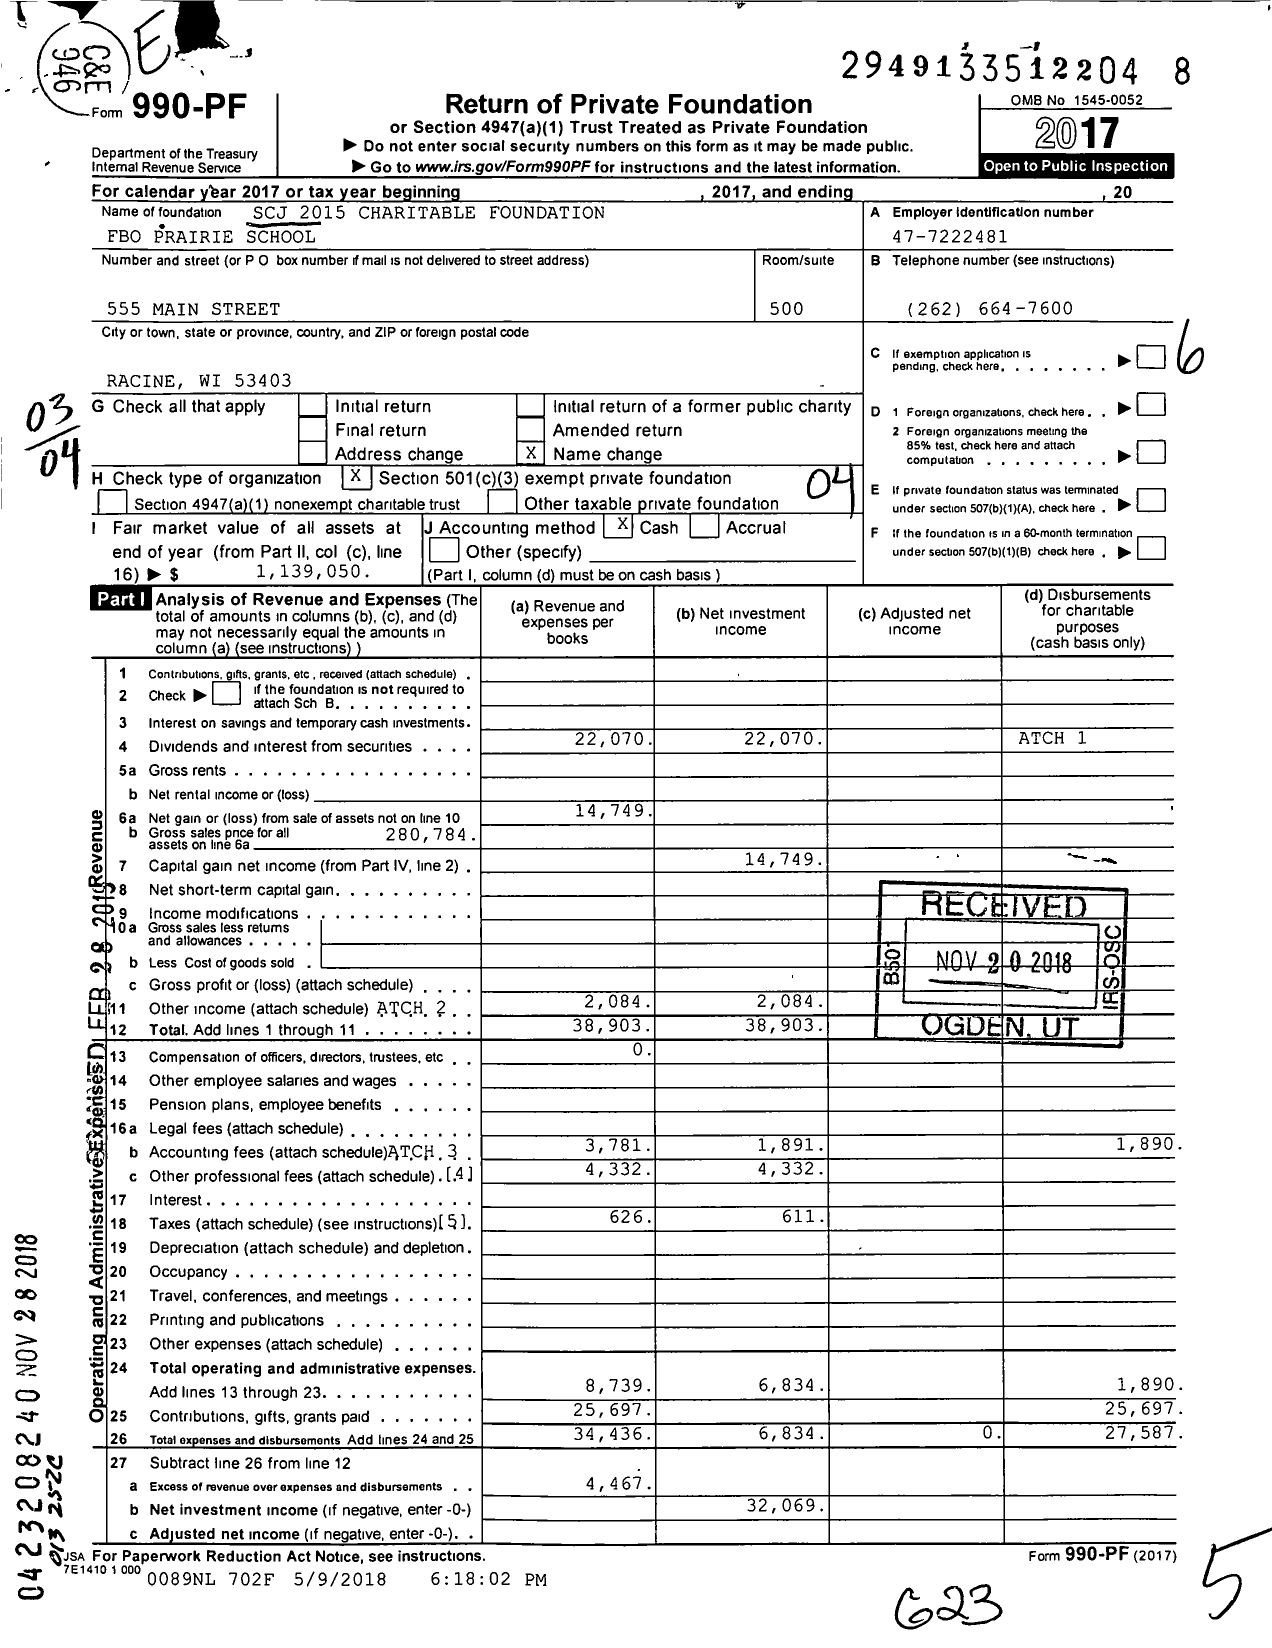 Image of first page of 2017 Form 990PF for SCJ 2015 Charitable Foundation Fbo Prairie